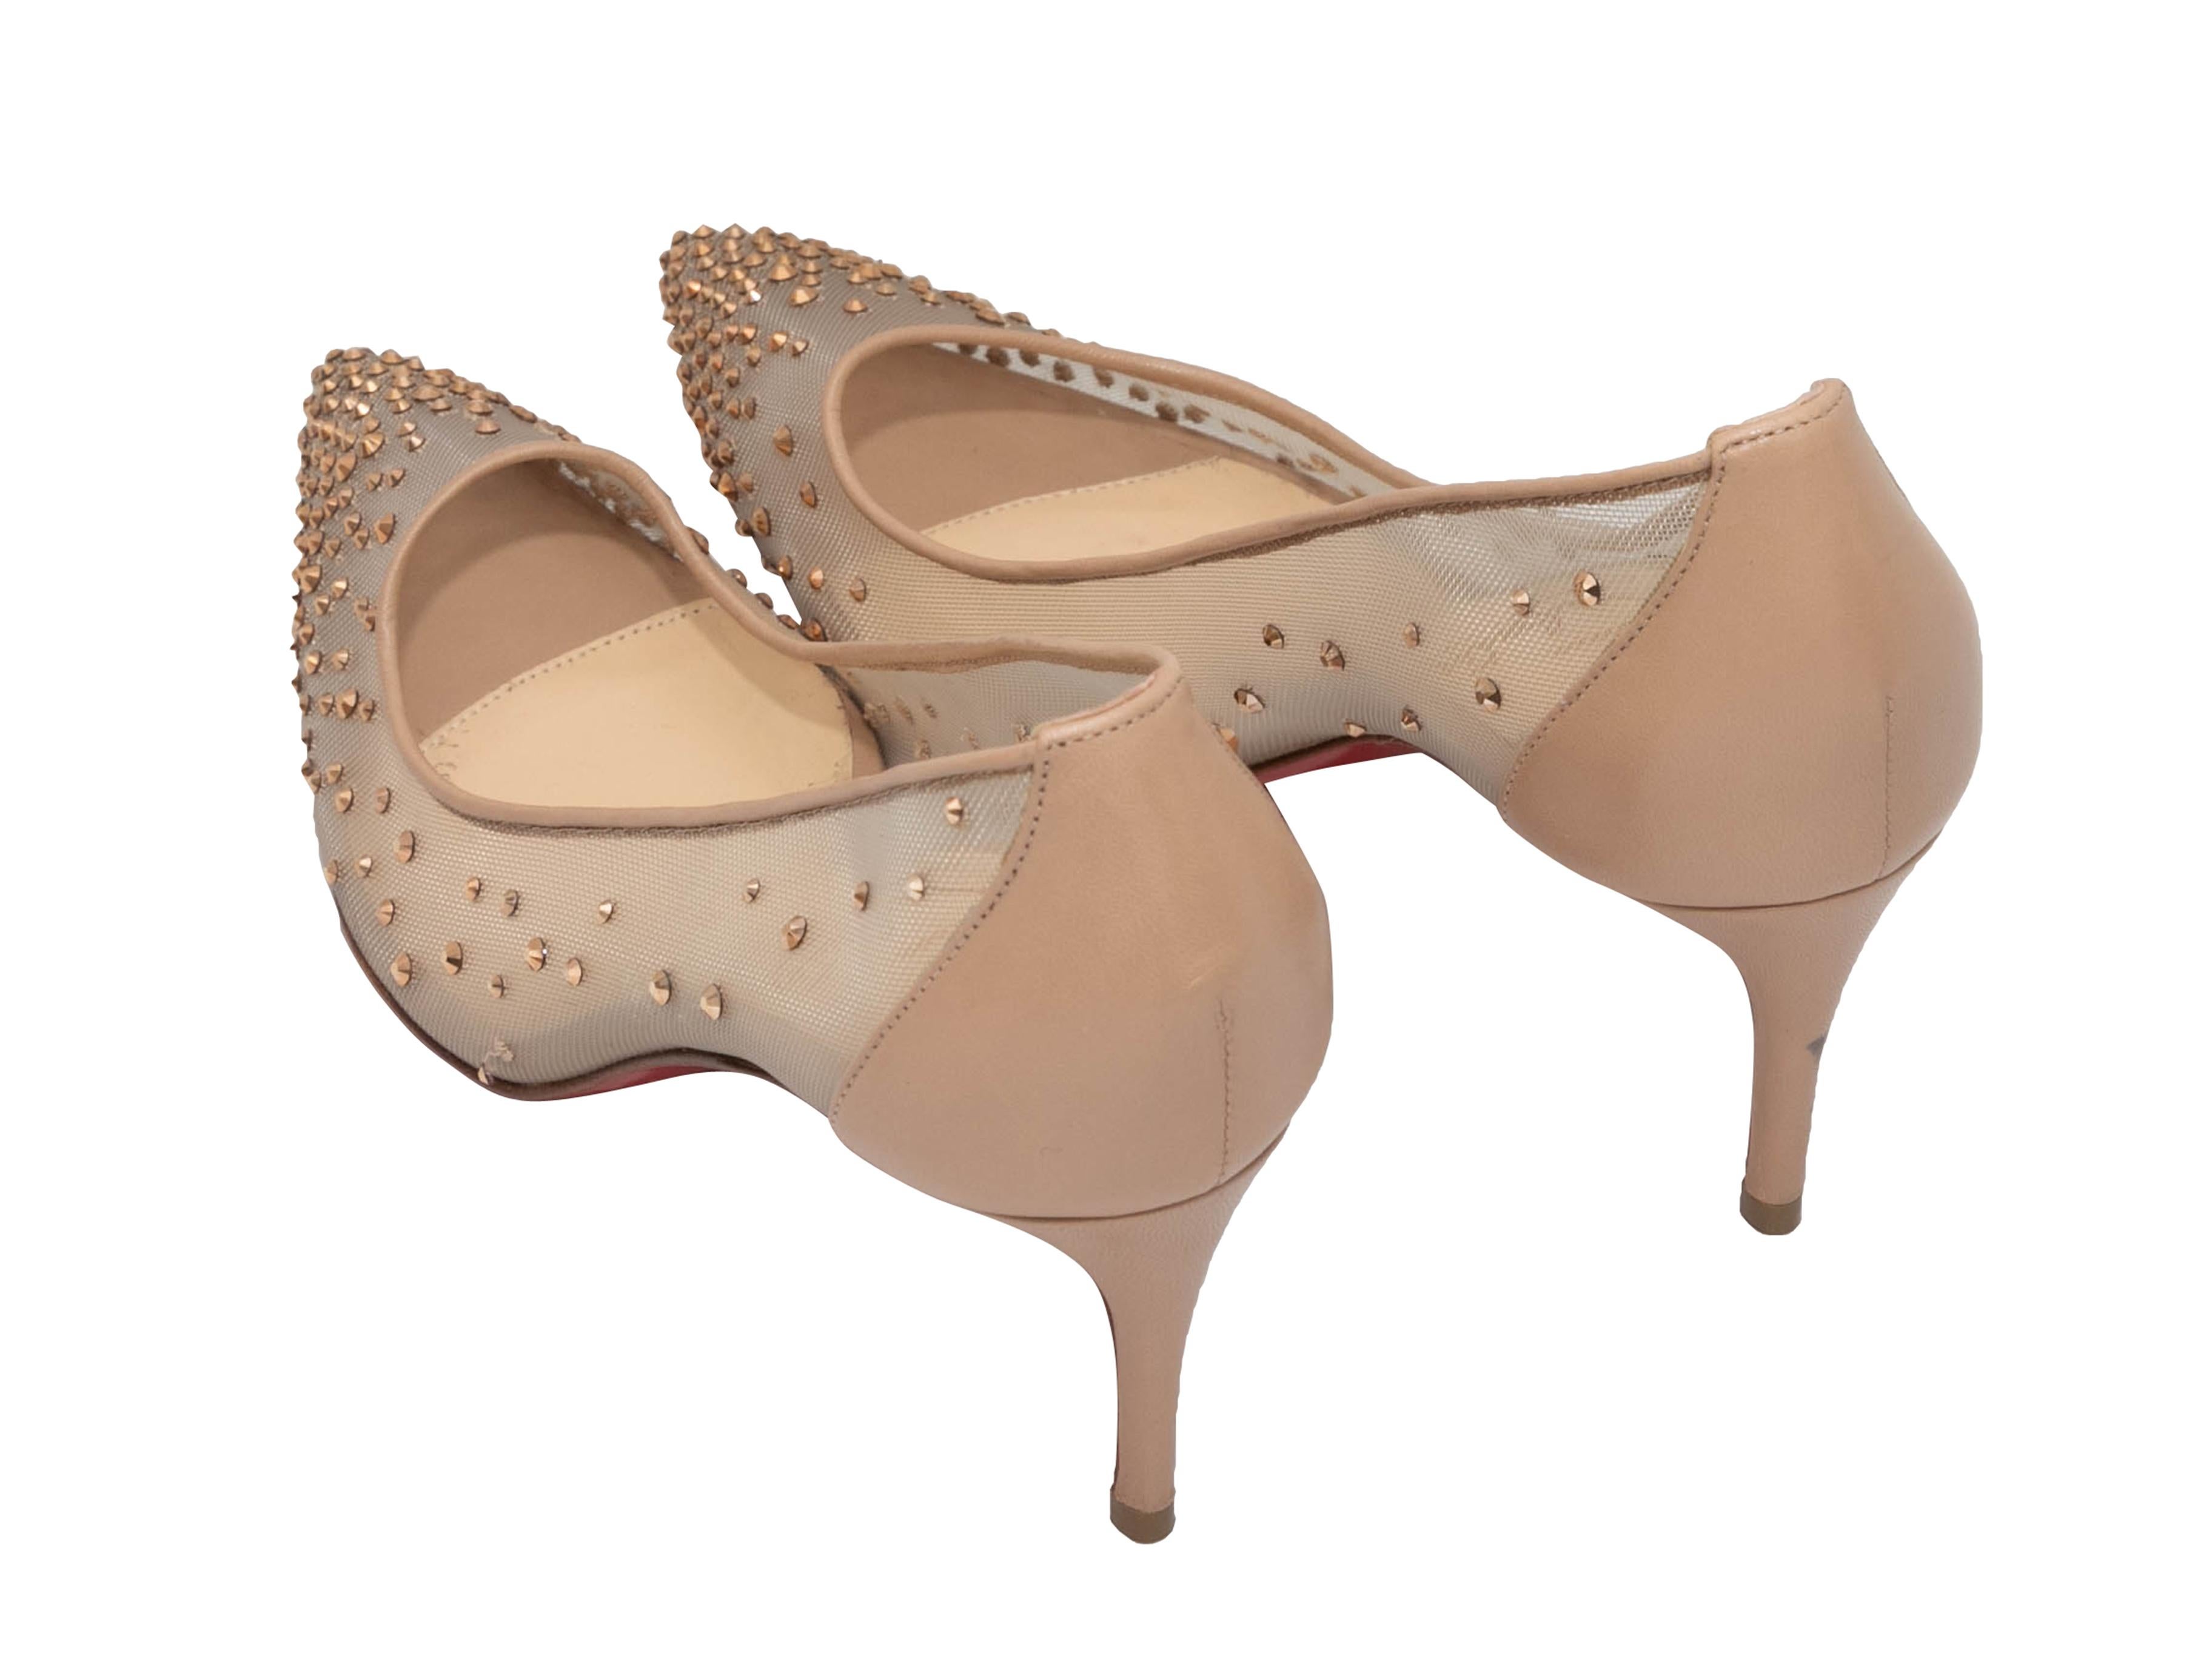 Women's Beige Christian Louboutin Follies Leather & Mesh Strass-Embellished Pumps Size 3